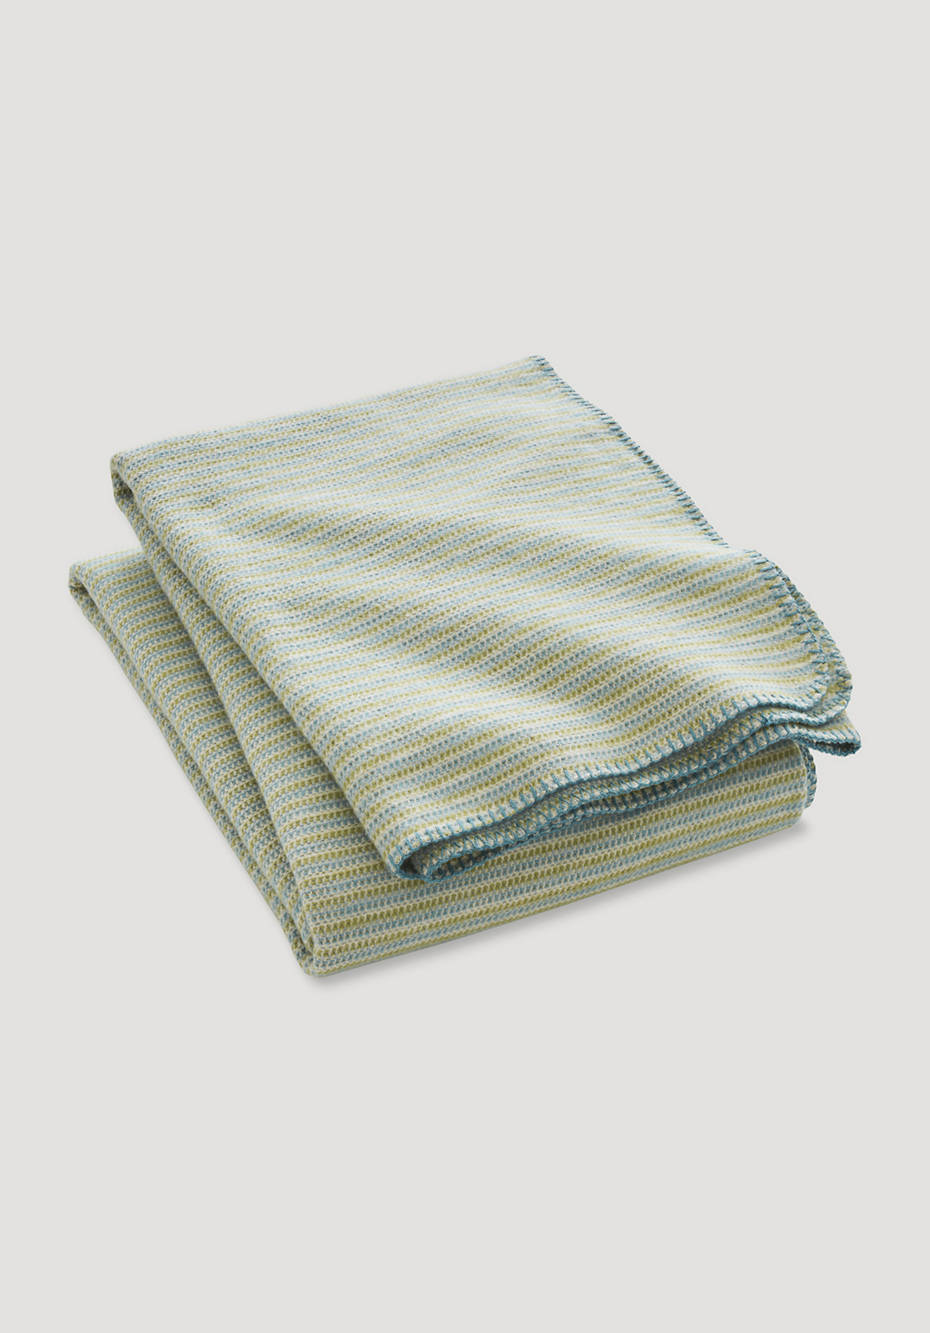 Structured plaid Rizzi made of pure organic cotton